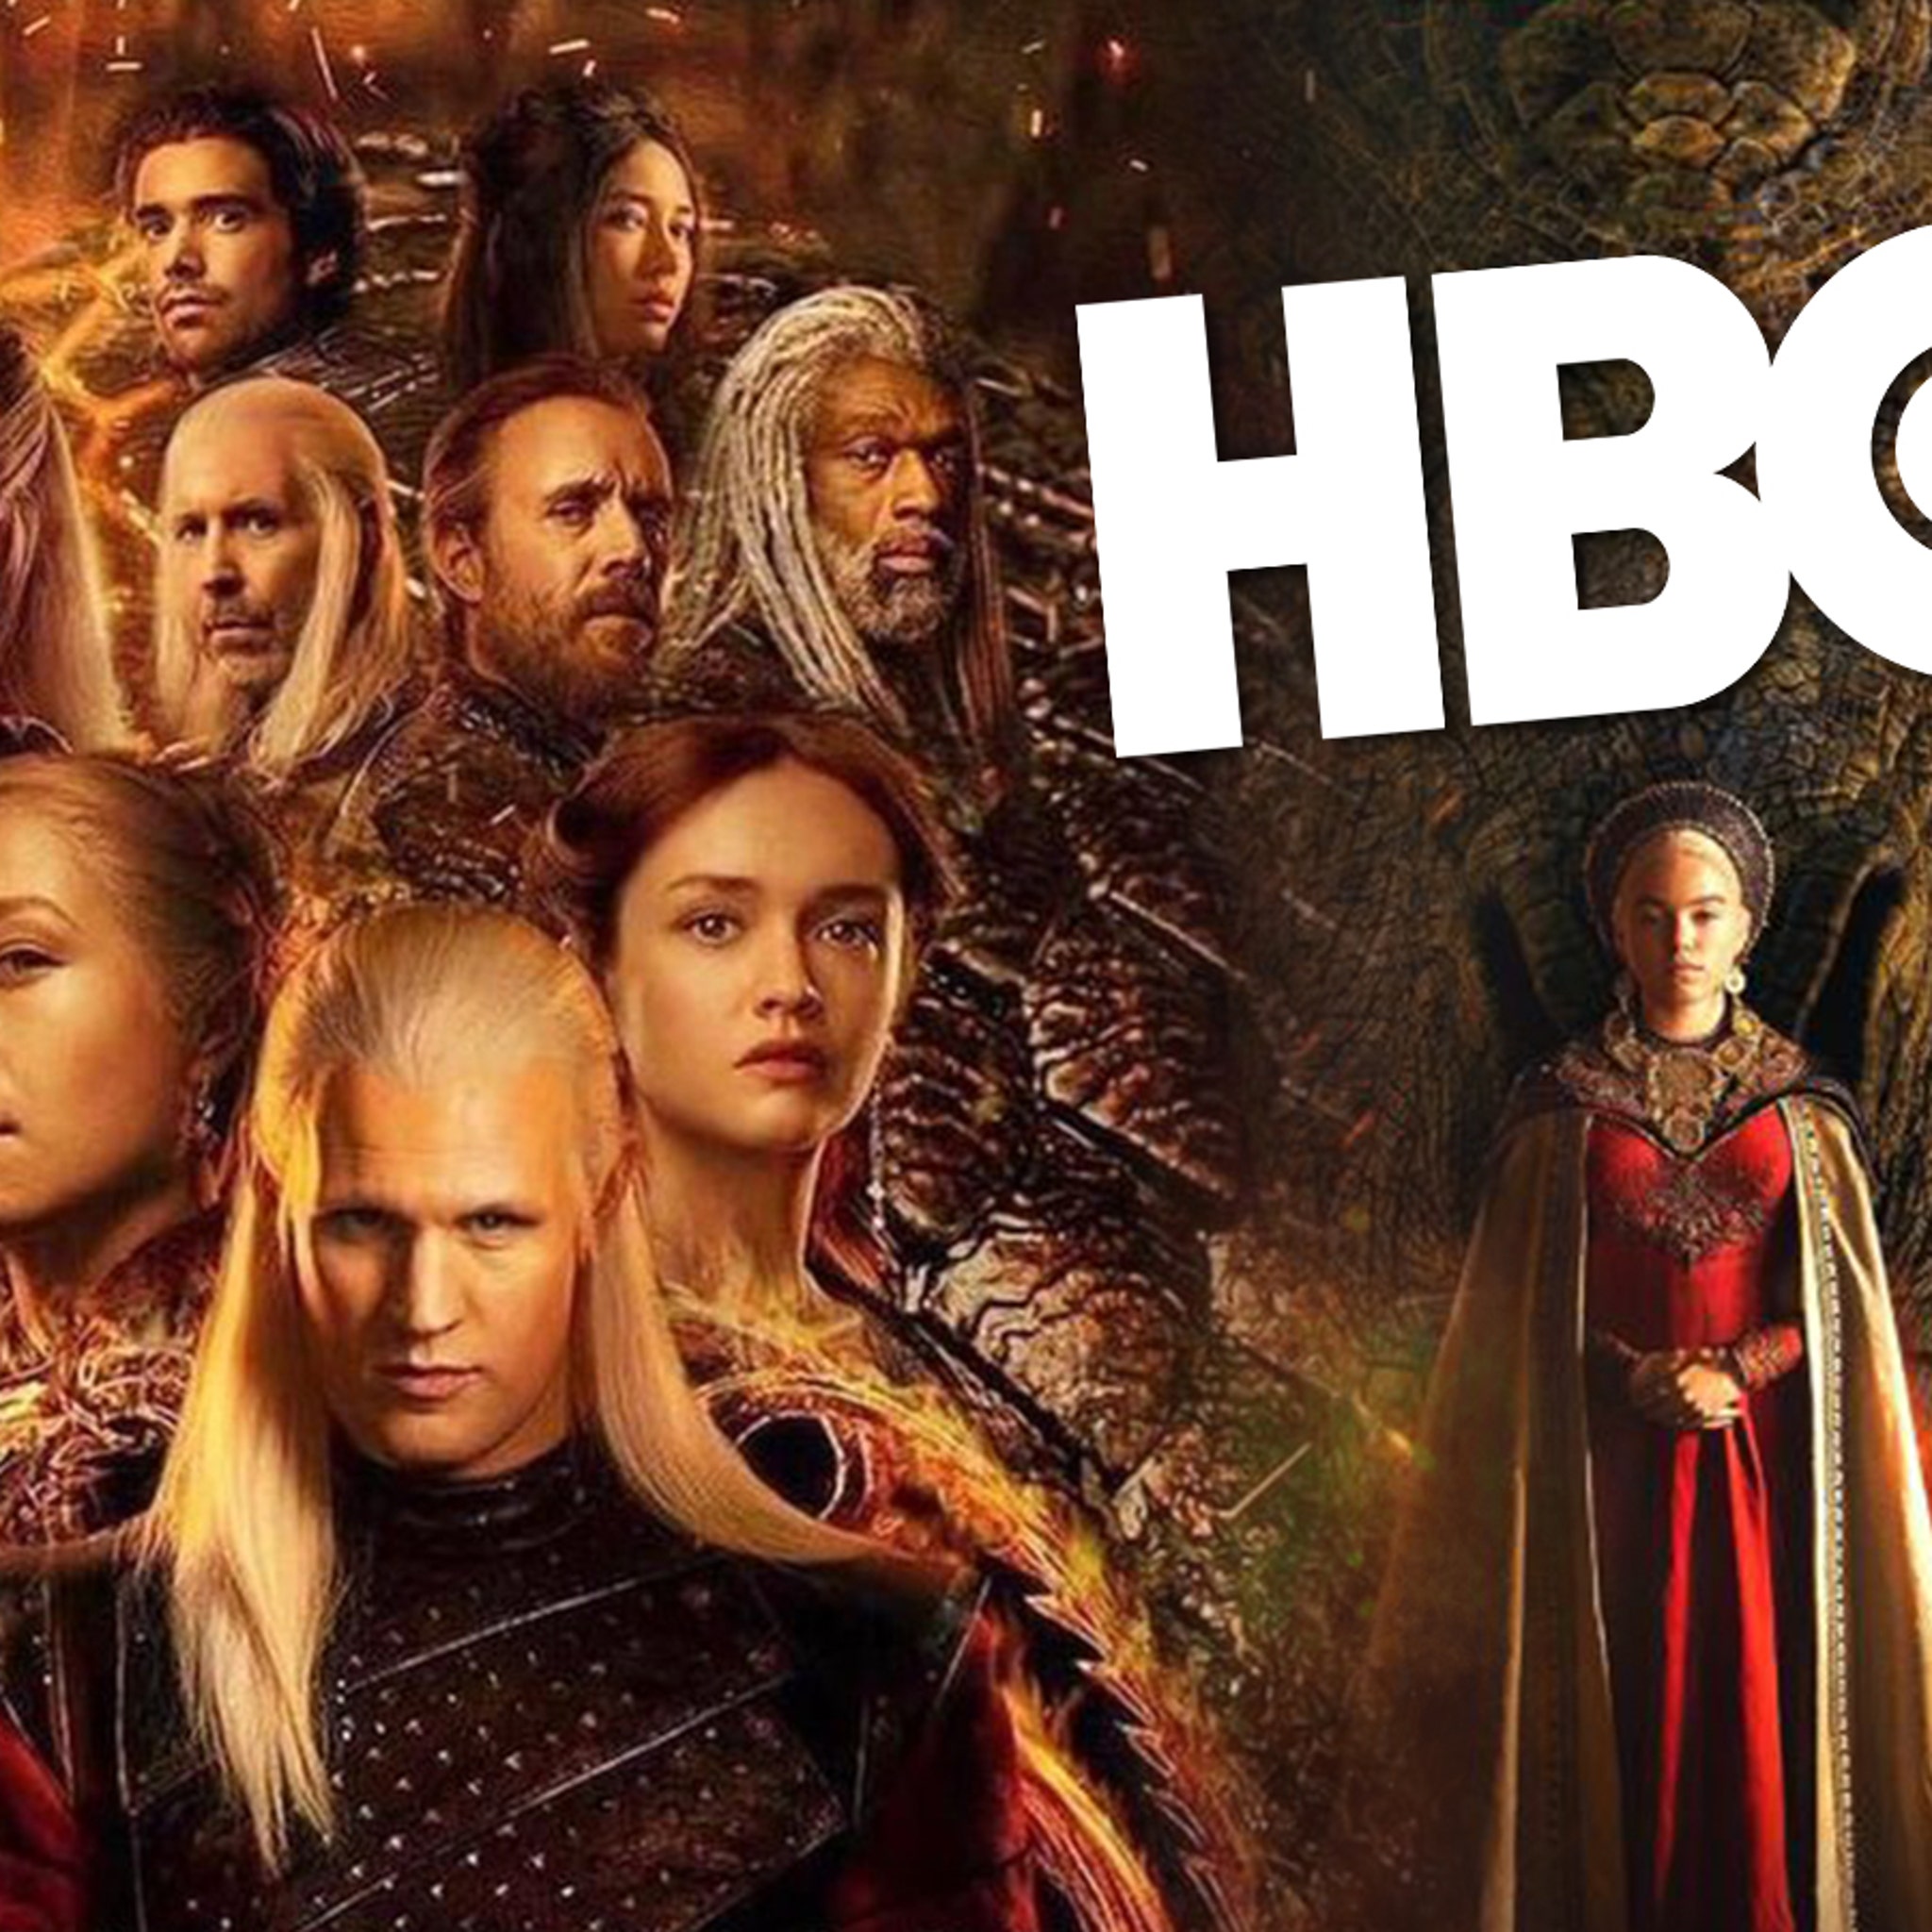 Fans can't cope with House of the Dragon's dramatic finale